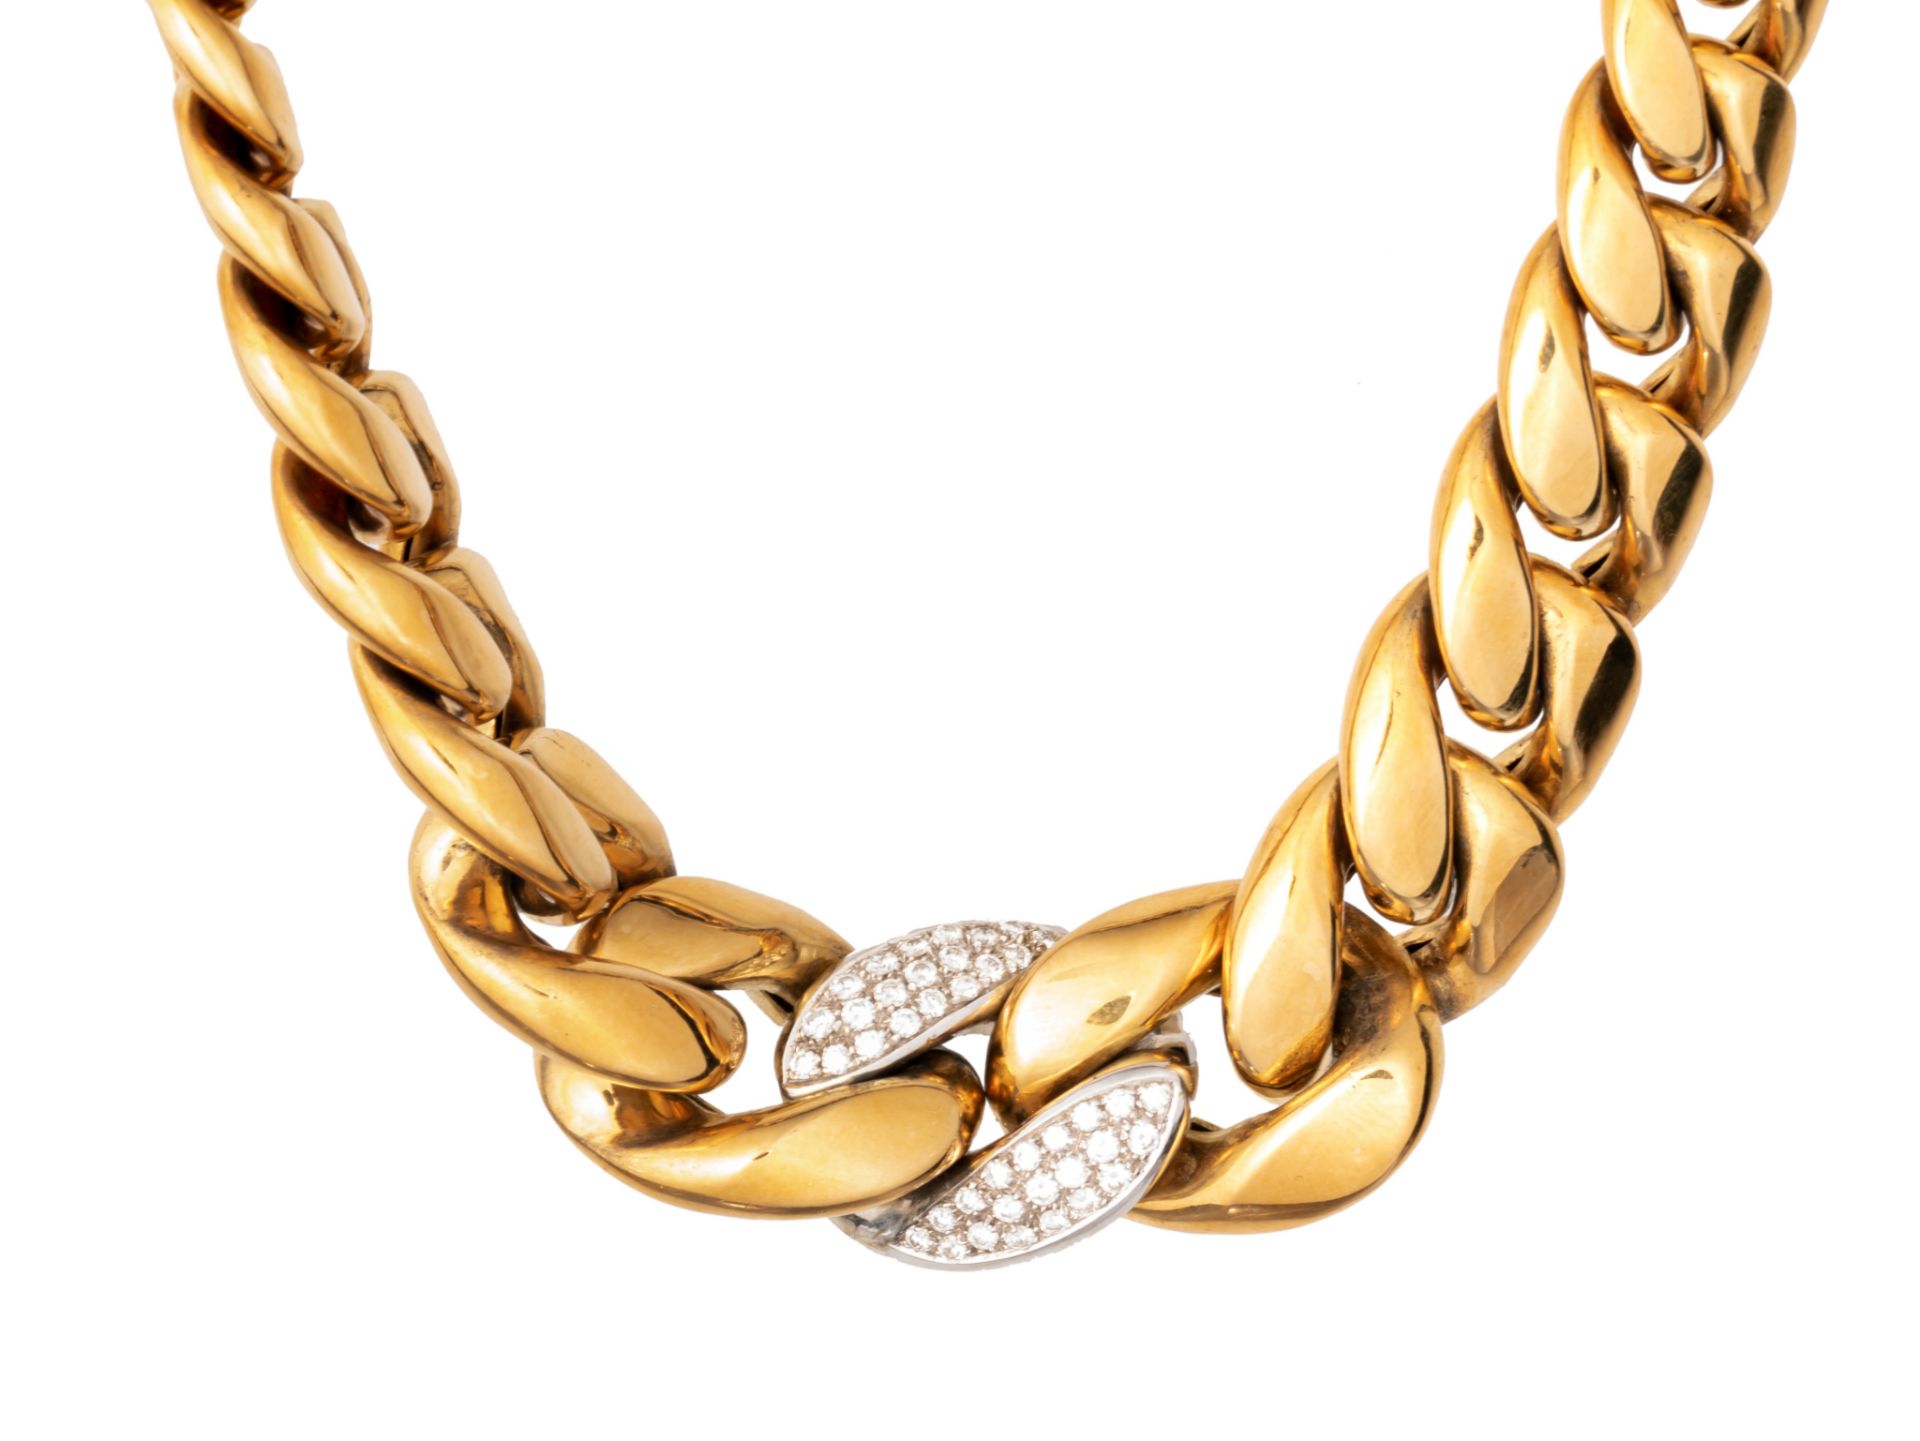 A braided necklace in 18ct yellow gold, set with brilliant-cut diamonds, 157 g - Image 3 of 4